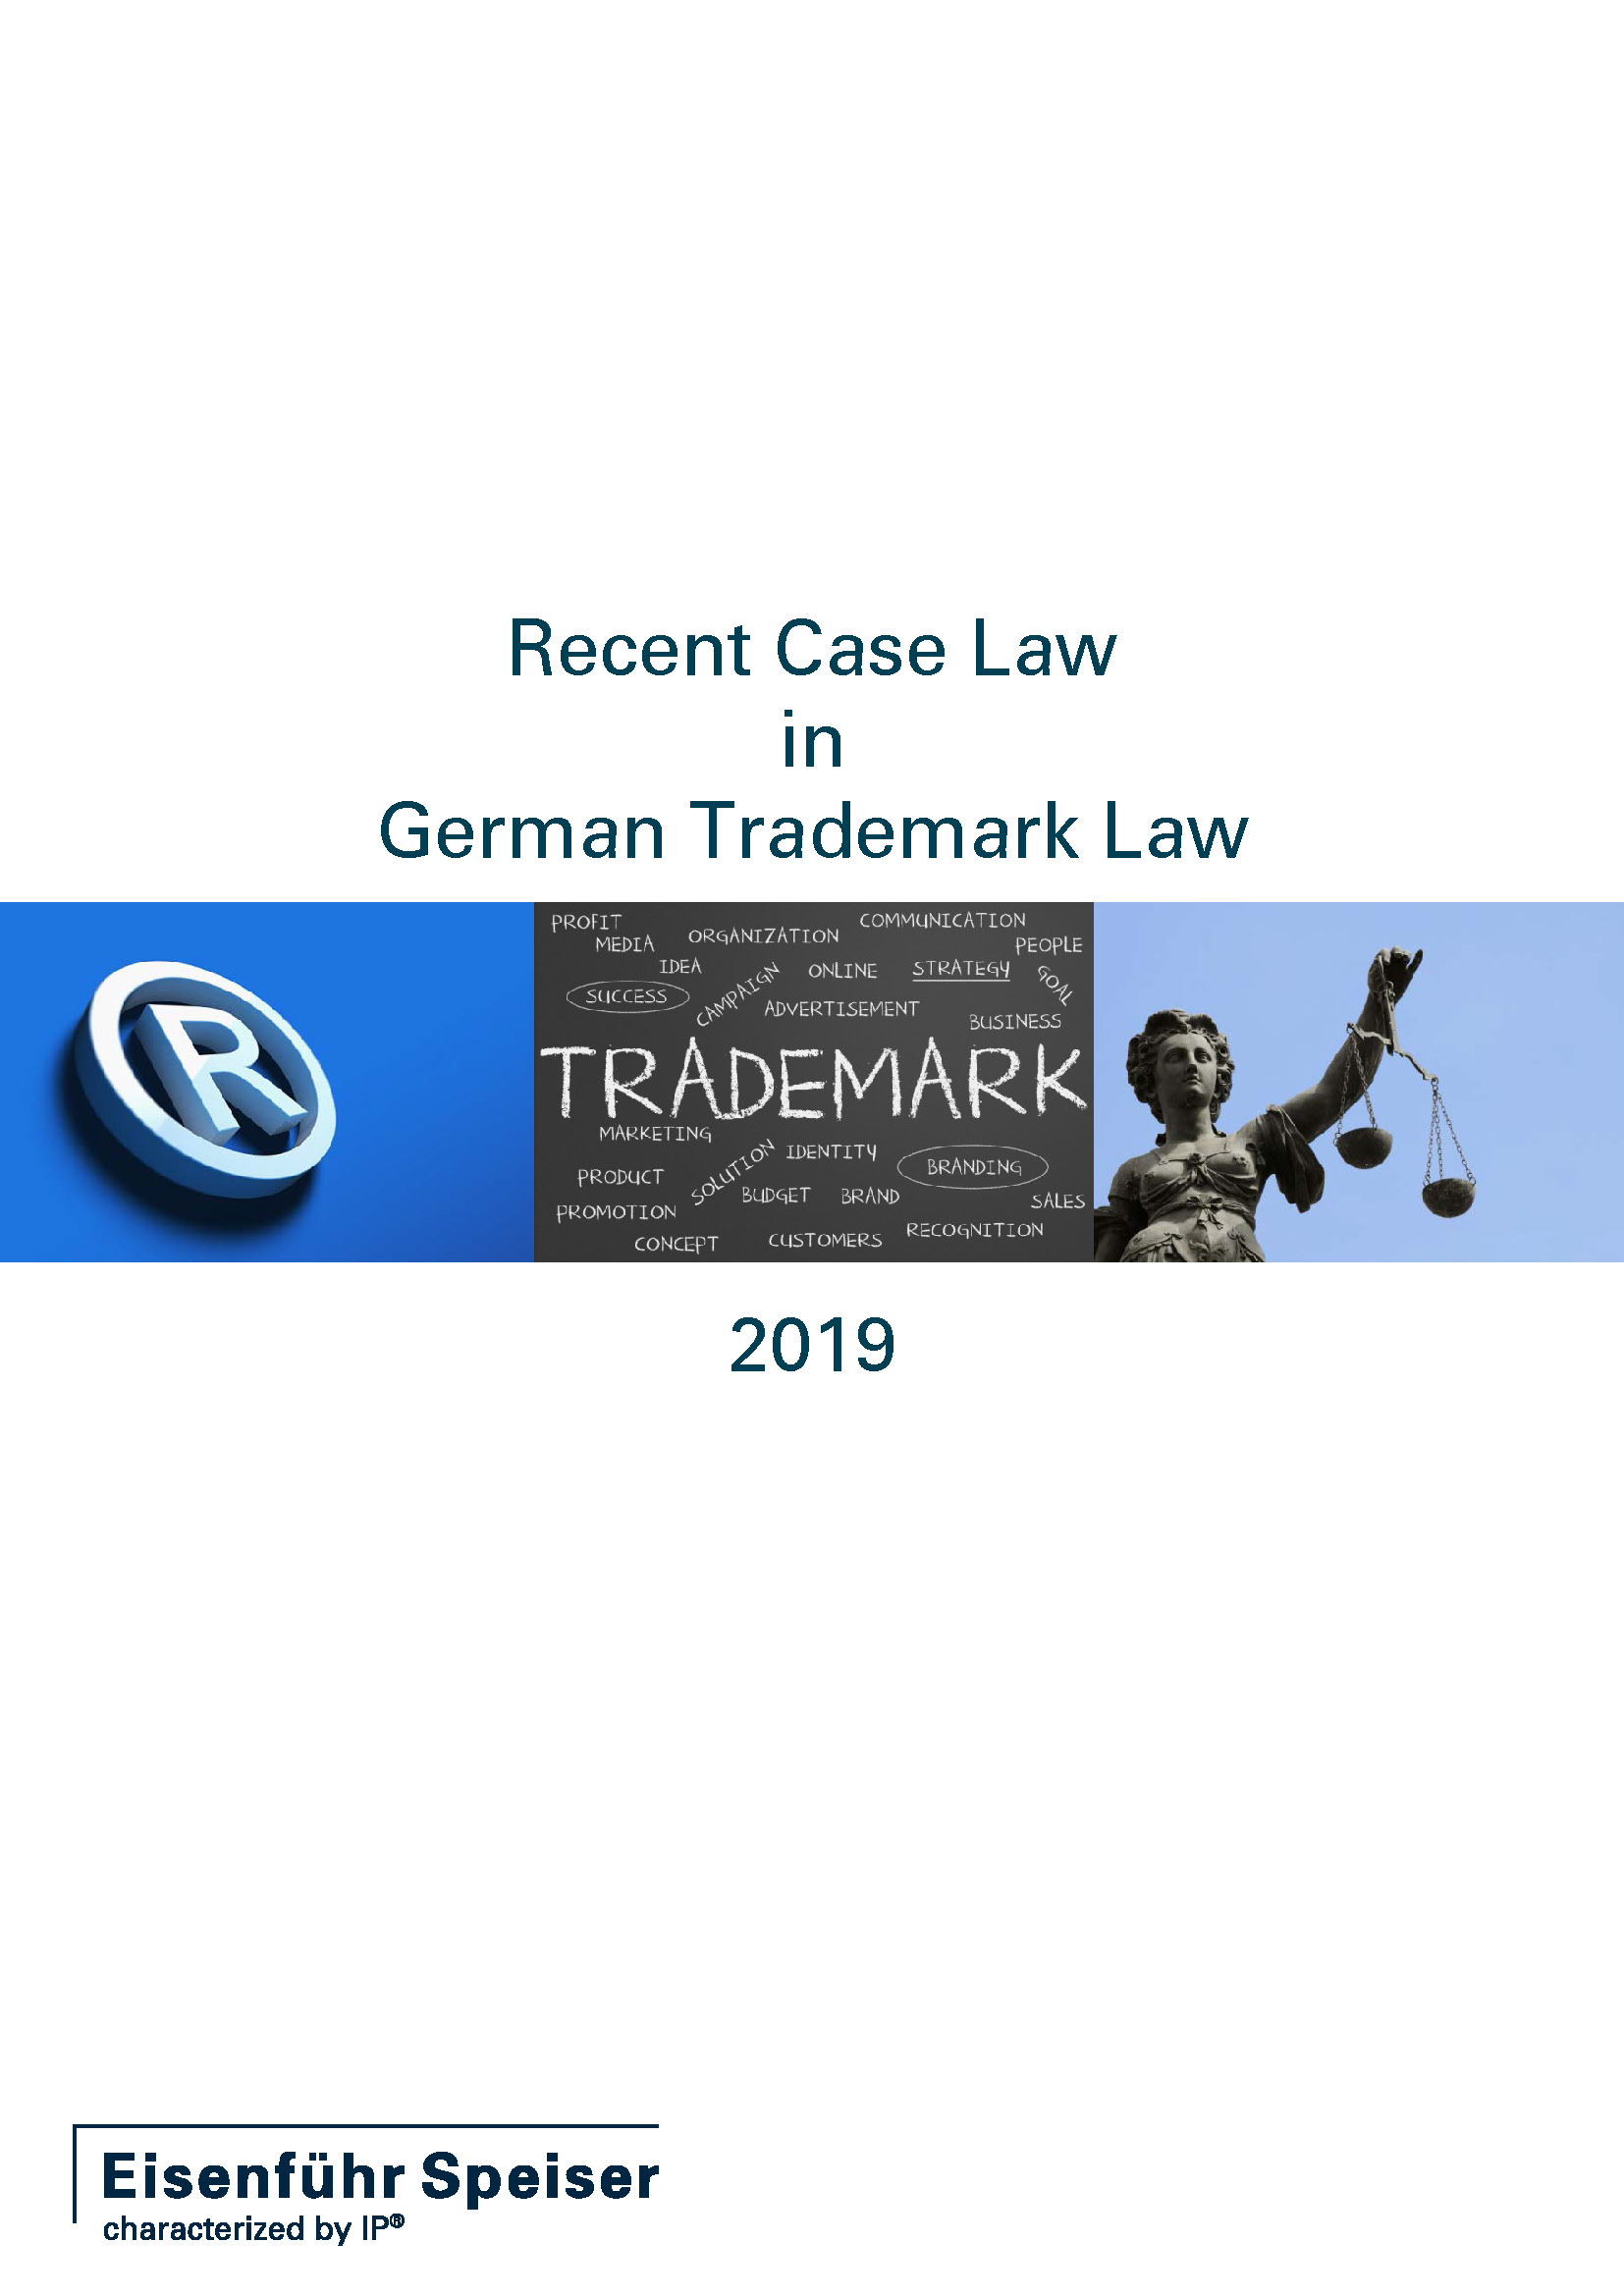 Recent Case Law in German Trademark Law 2019